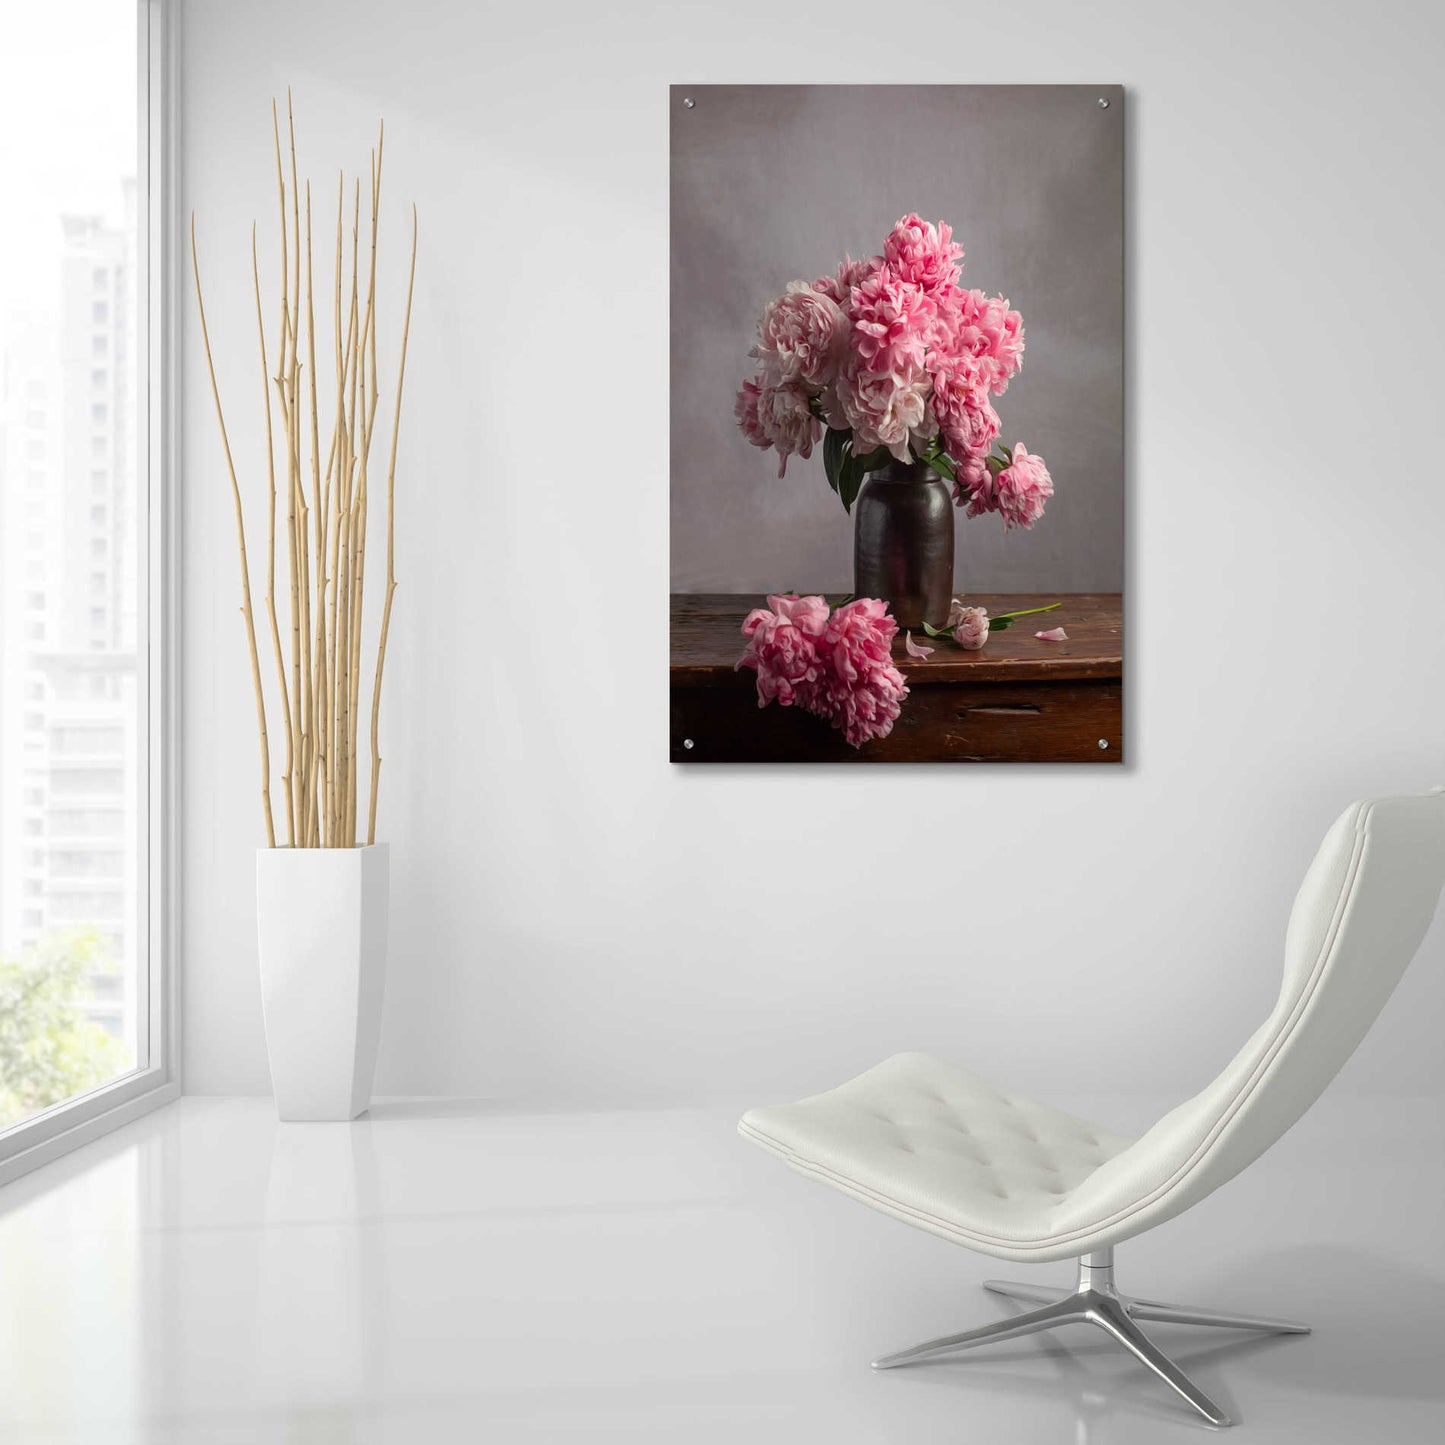 Epic Art 'Layers Of Pink' by Leah McLean Acrylic Glass Wall Art,24x36